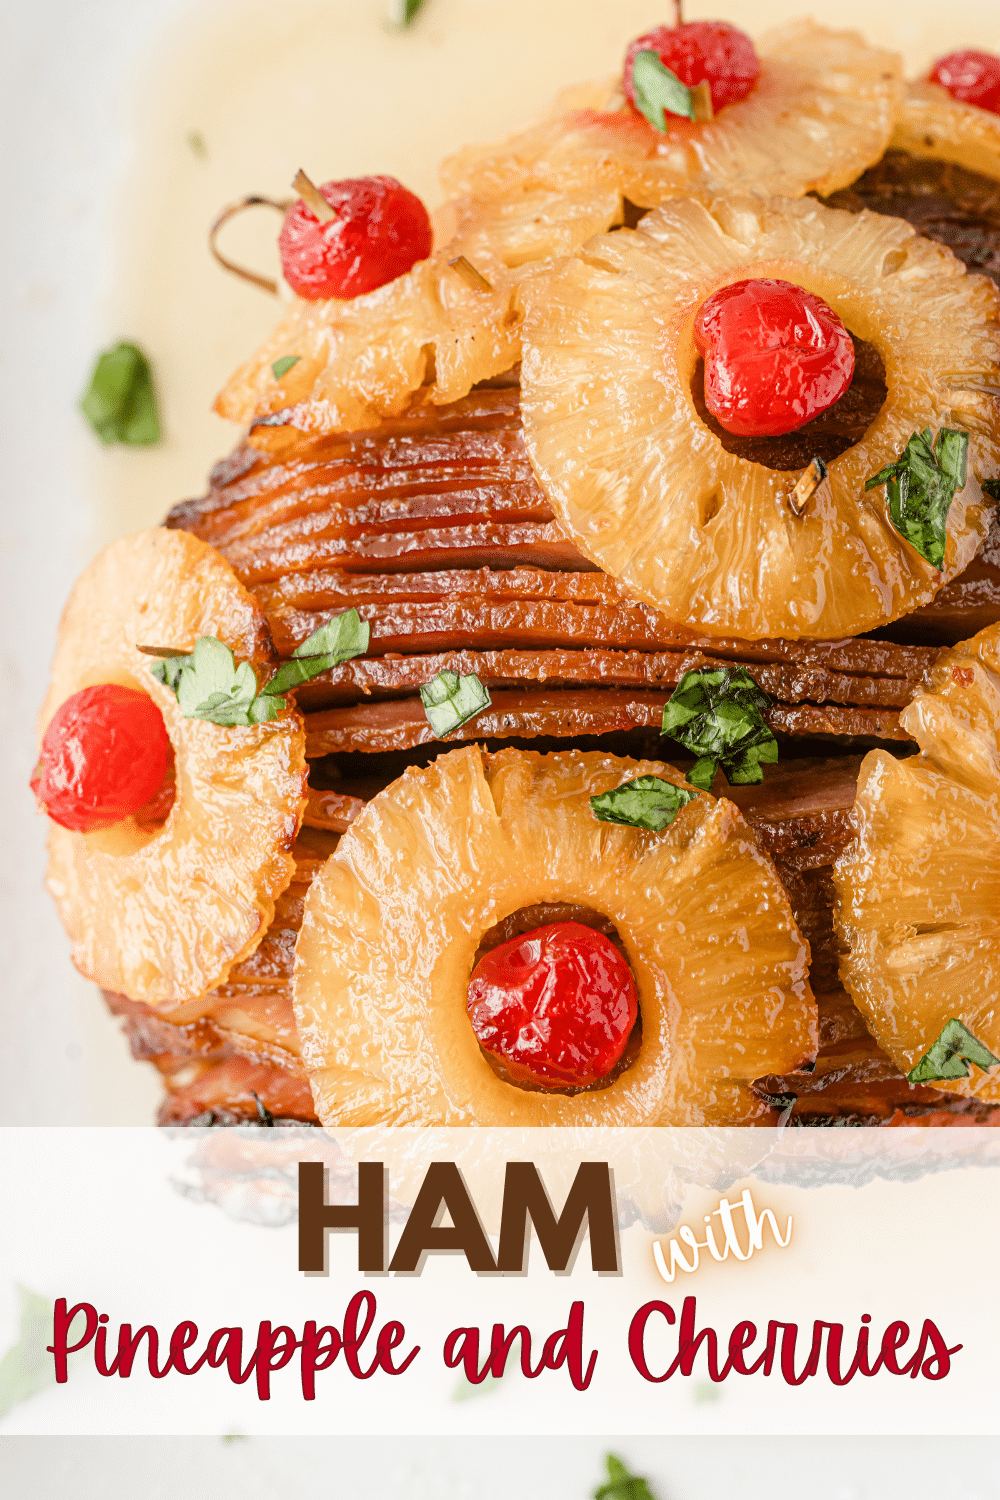 This Ham with Pineapple and Cherries is the perfect addition to your holiday table. The combination of fruit and ham is a timeless classic. #hamwithpineappleandcherries #brownsugarglaze #spiralcuthams #holidayham #easter via @wondermomwannab